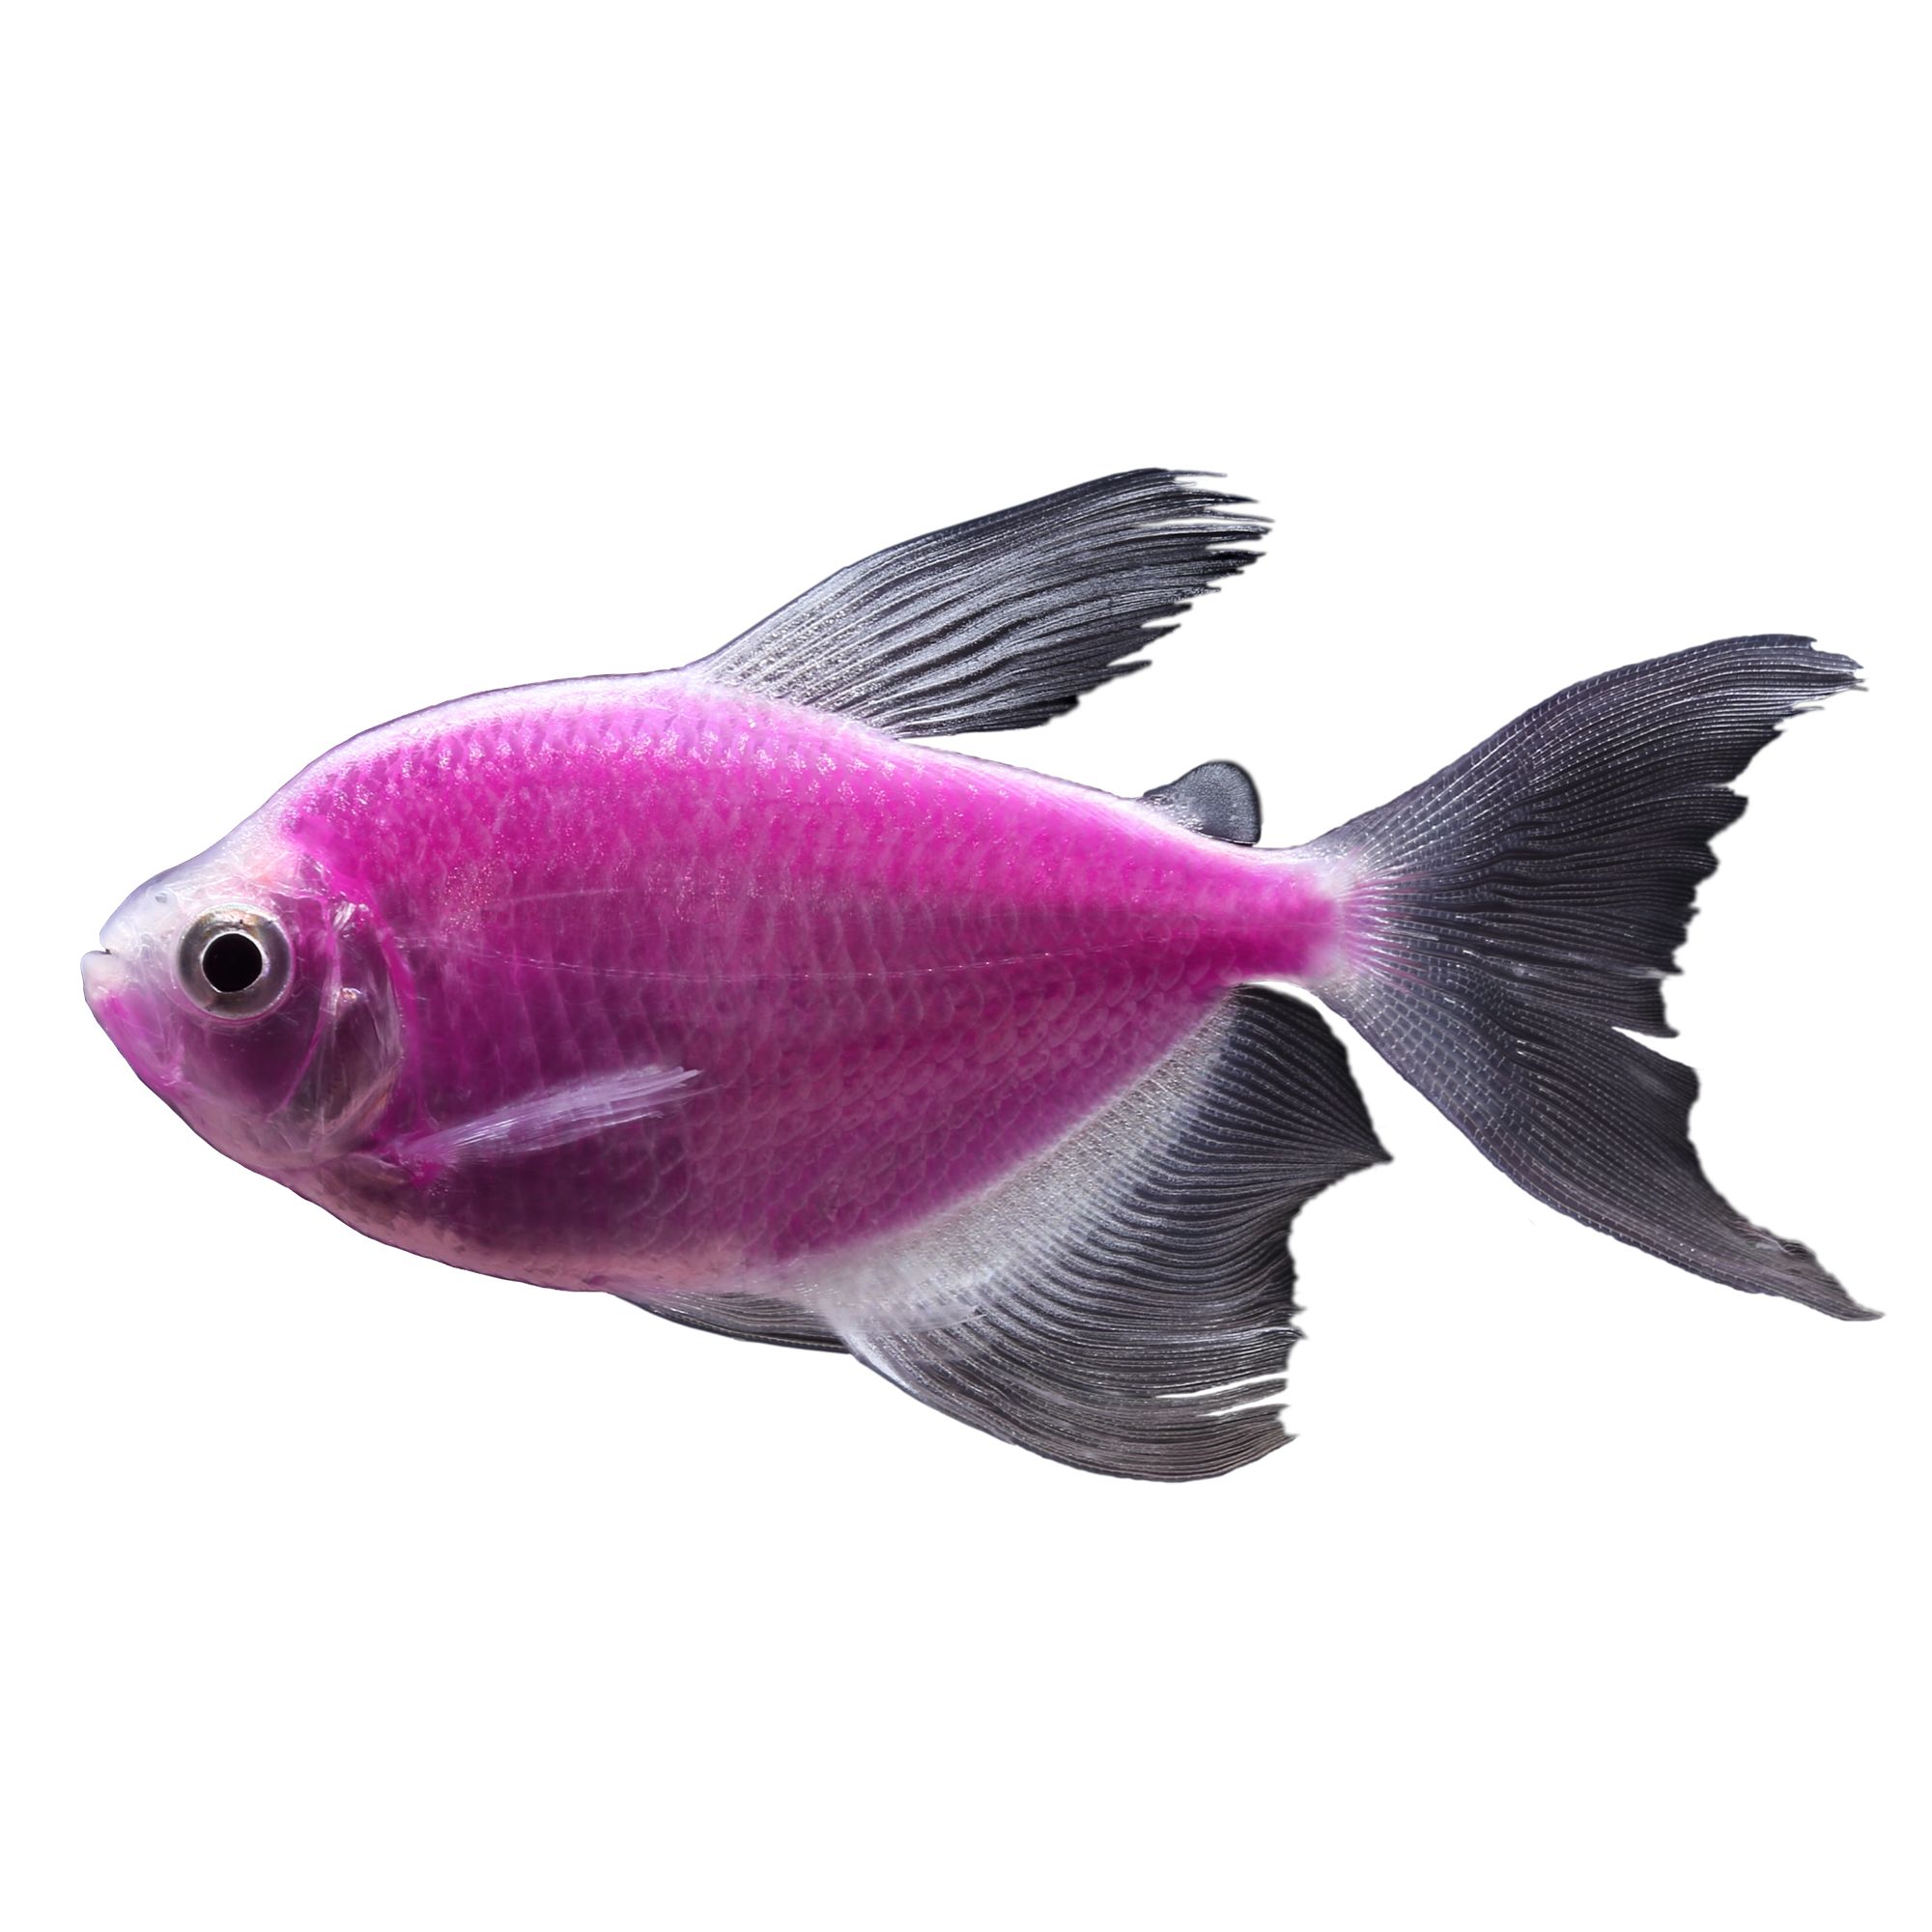 places to buy pet fish near me